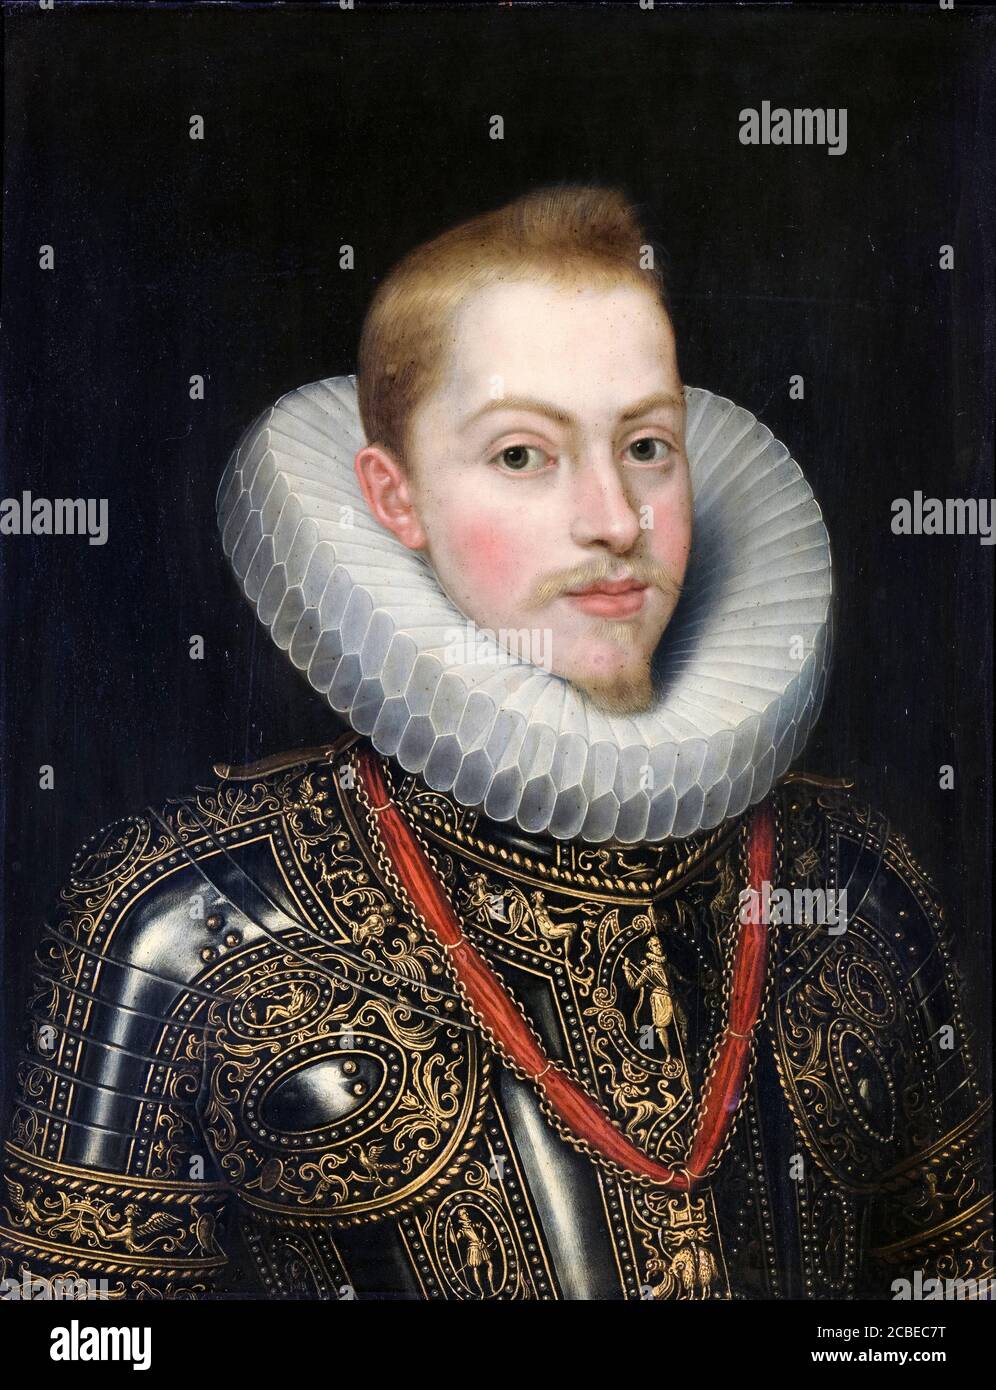 Philip III (1578-1621), King of Spain, portrait painting by Workshop of Frans Pourbus the Younger, circa 1600 Stock Photo